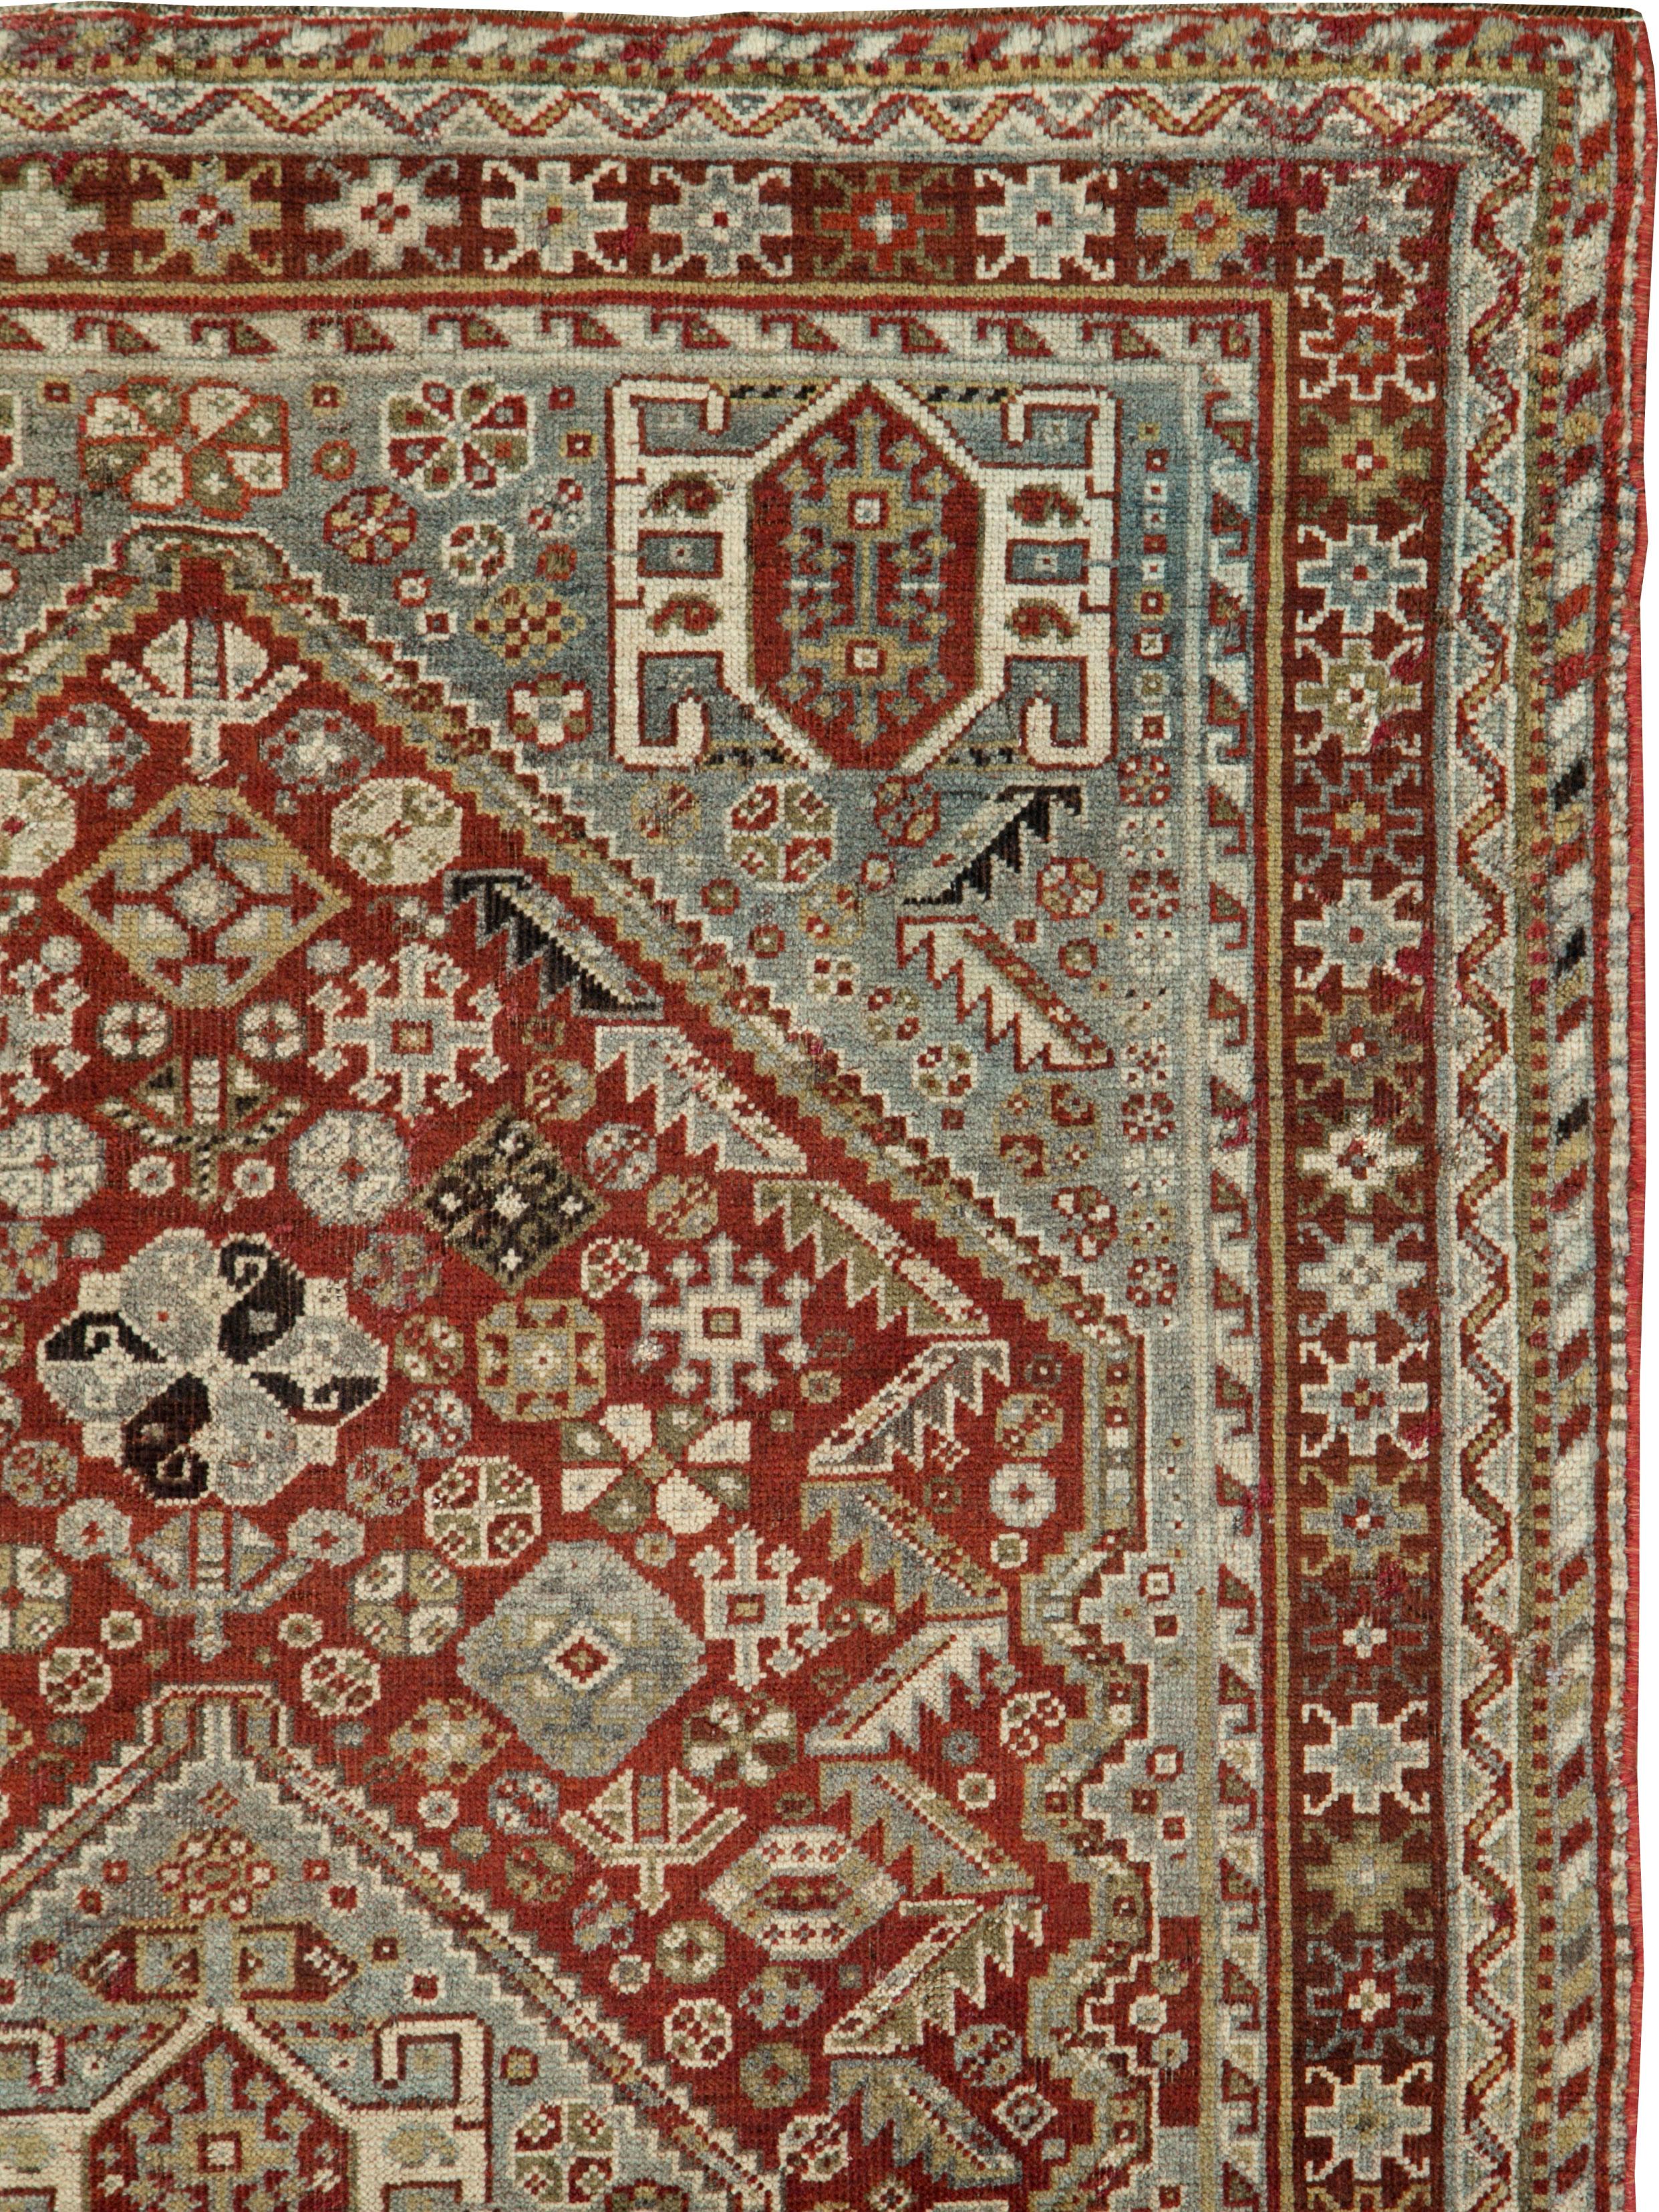 An antique Persian Qashqai rug from the early 20th century.

Measures: 4' 1